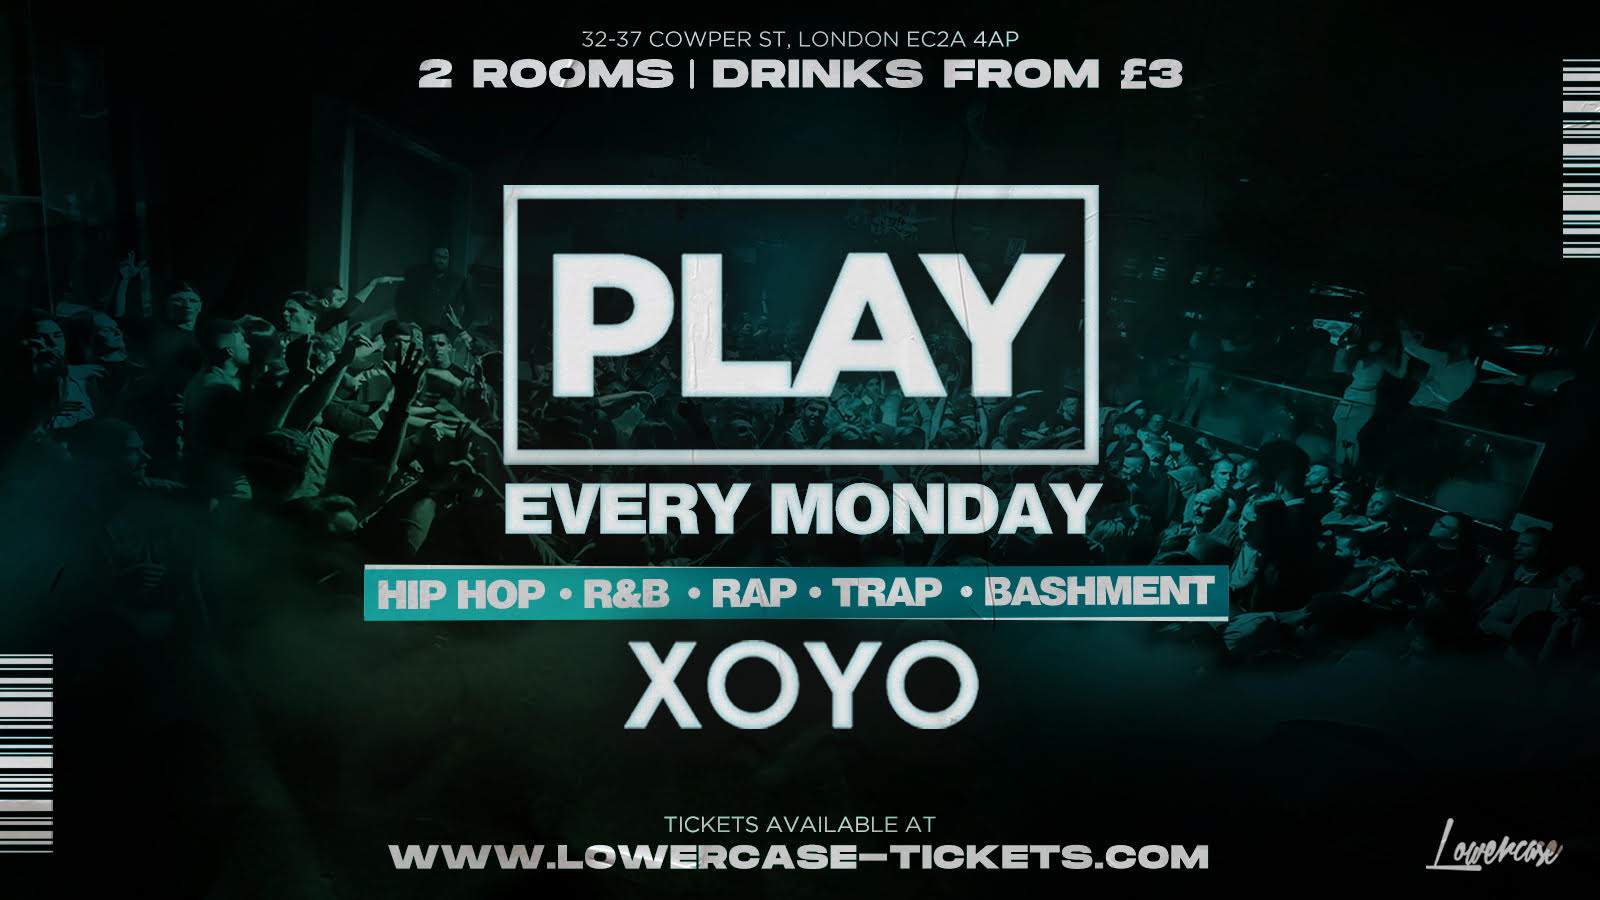 Play London - The Biggest Weekly Monday Student Night - Página frontal